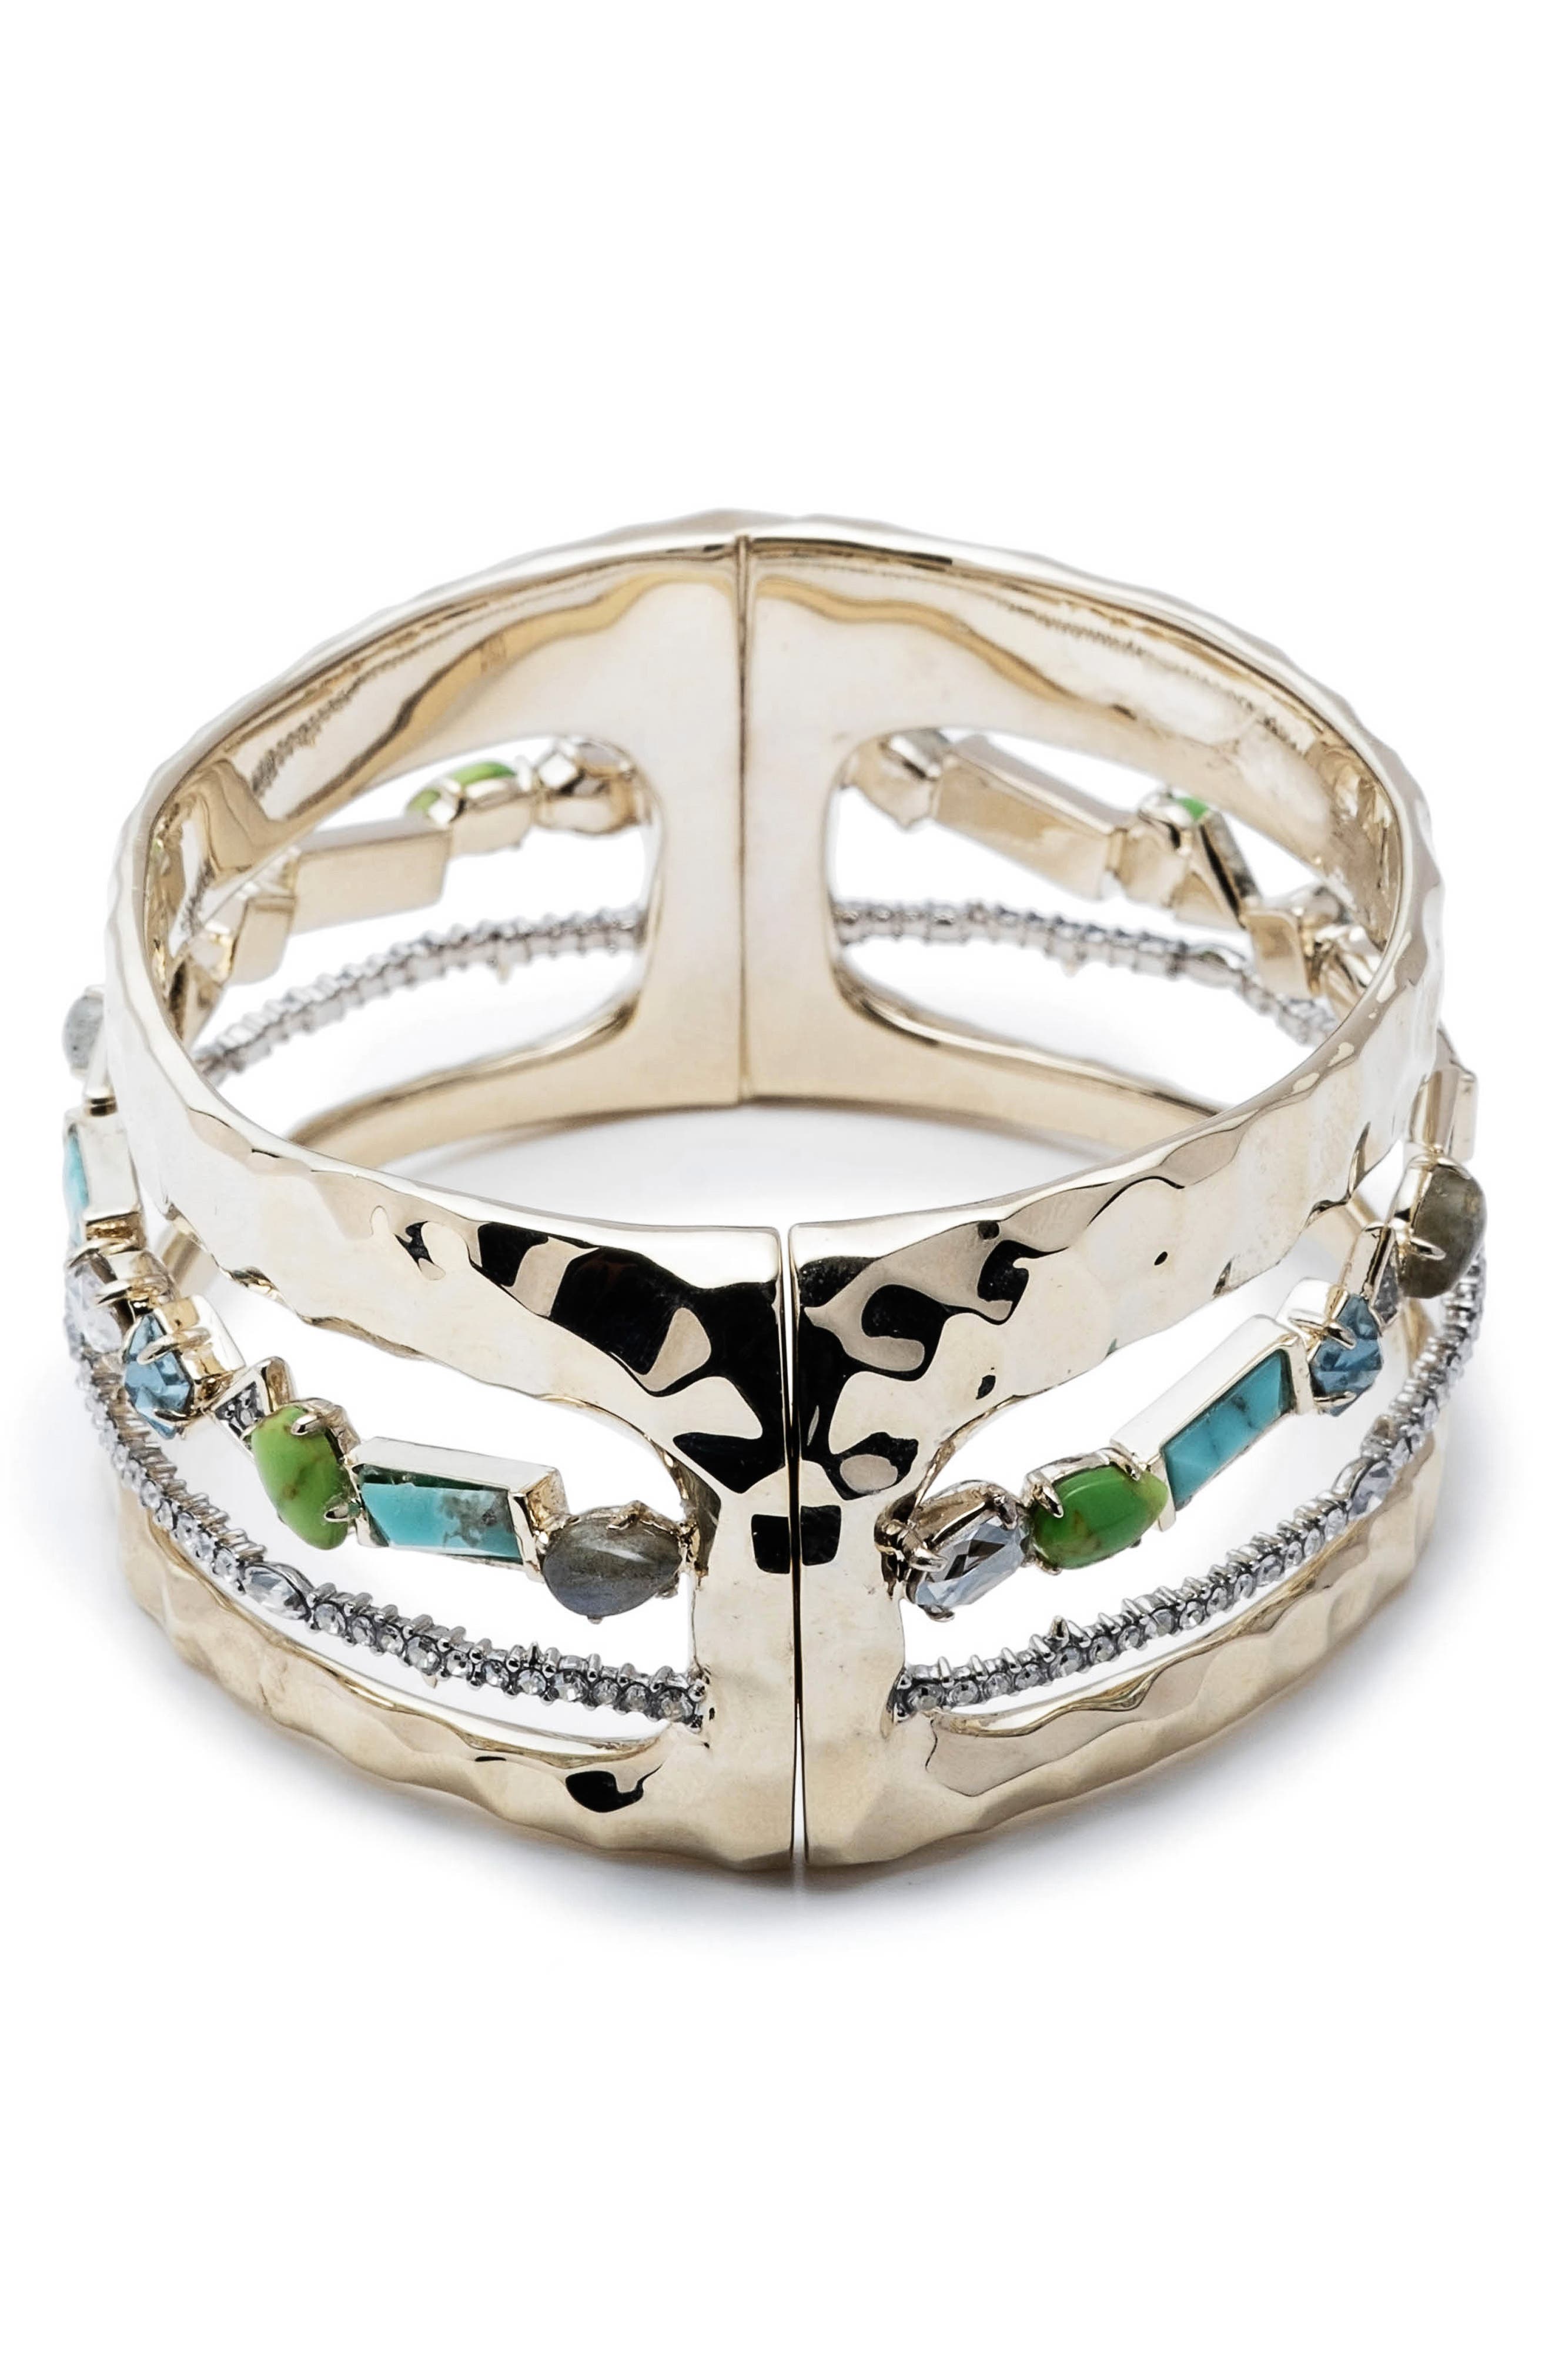 Alexis Bittar Hammered Metal With Stone & Crystal Row Bracelet In Two Tone